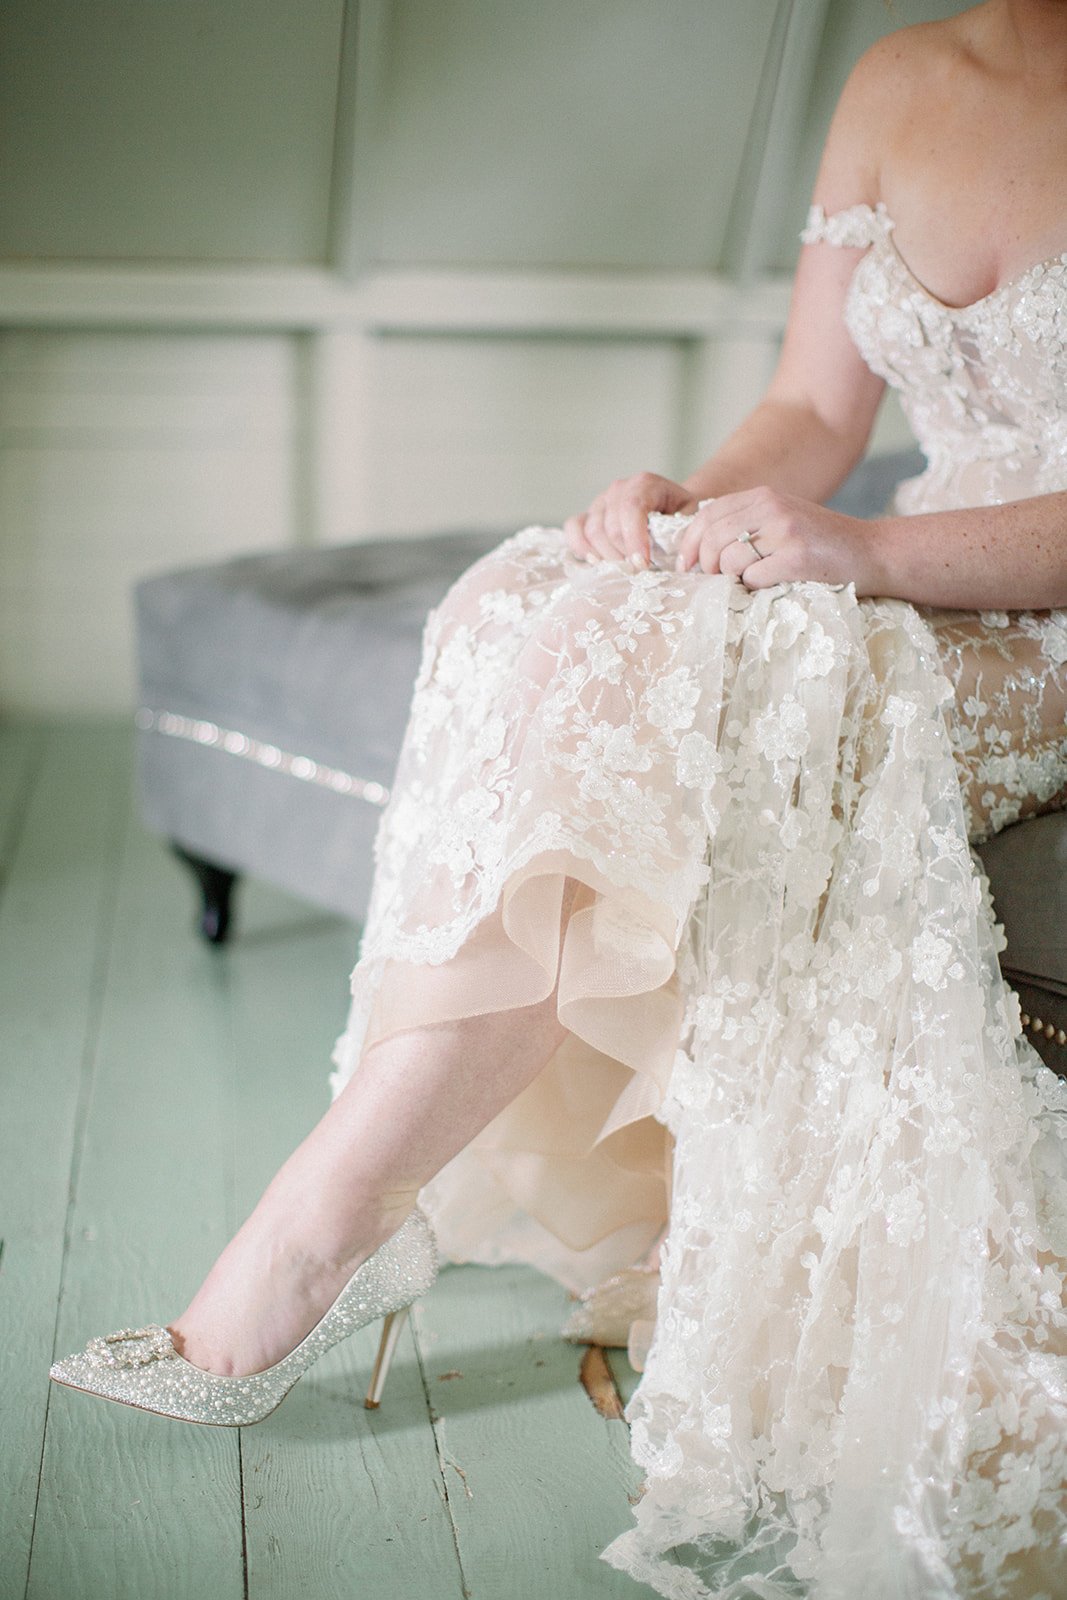 Jimmy Choo sparkle wedding shoes with lace gown